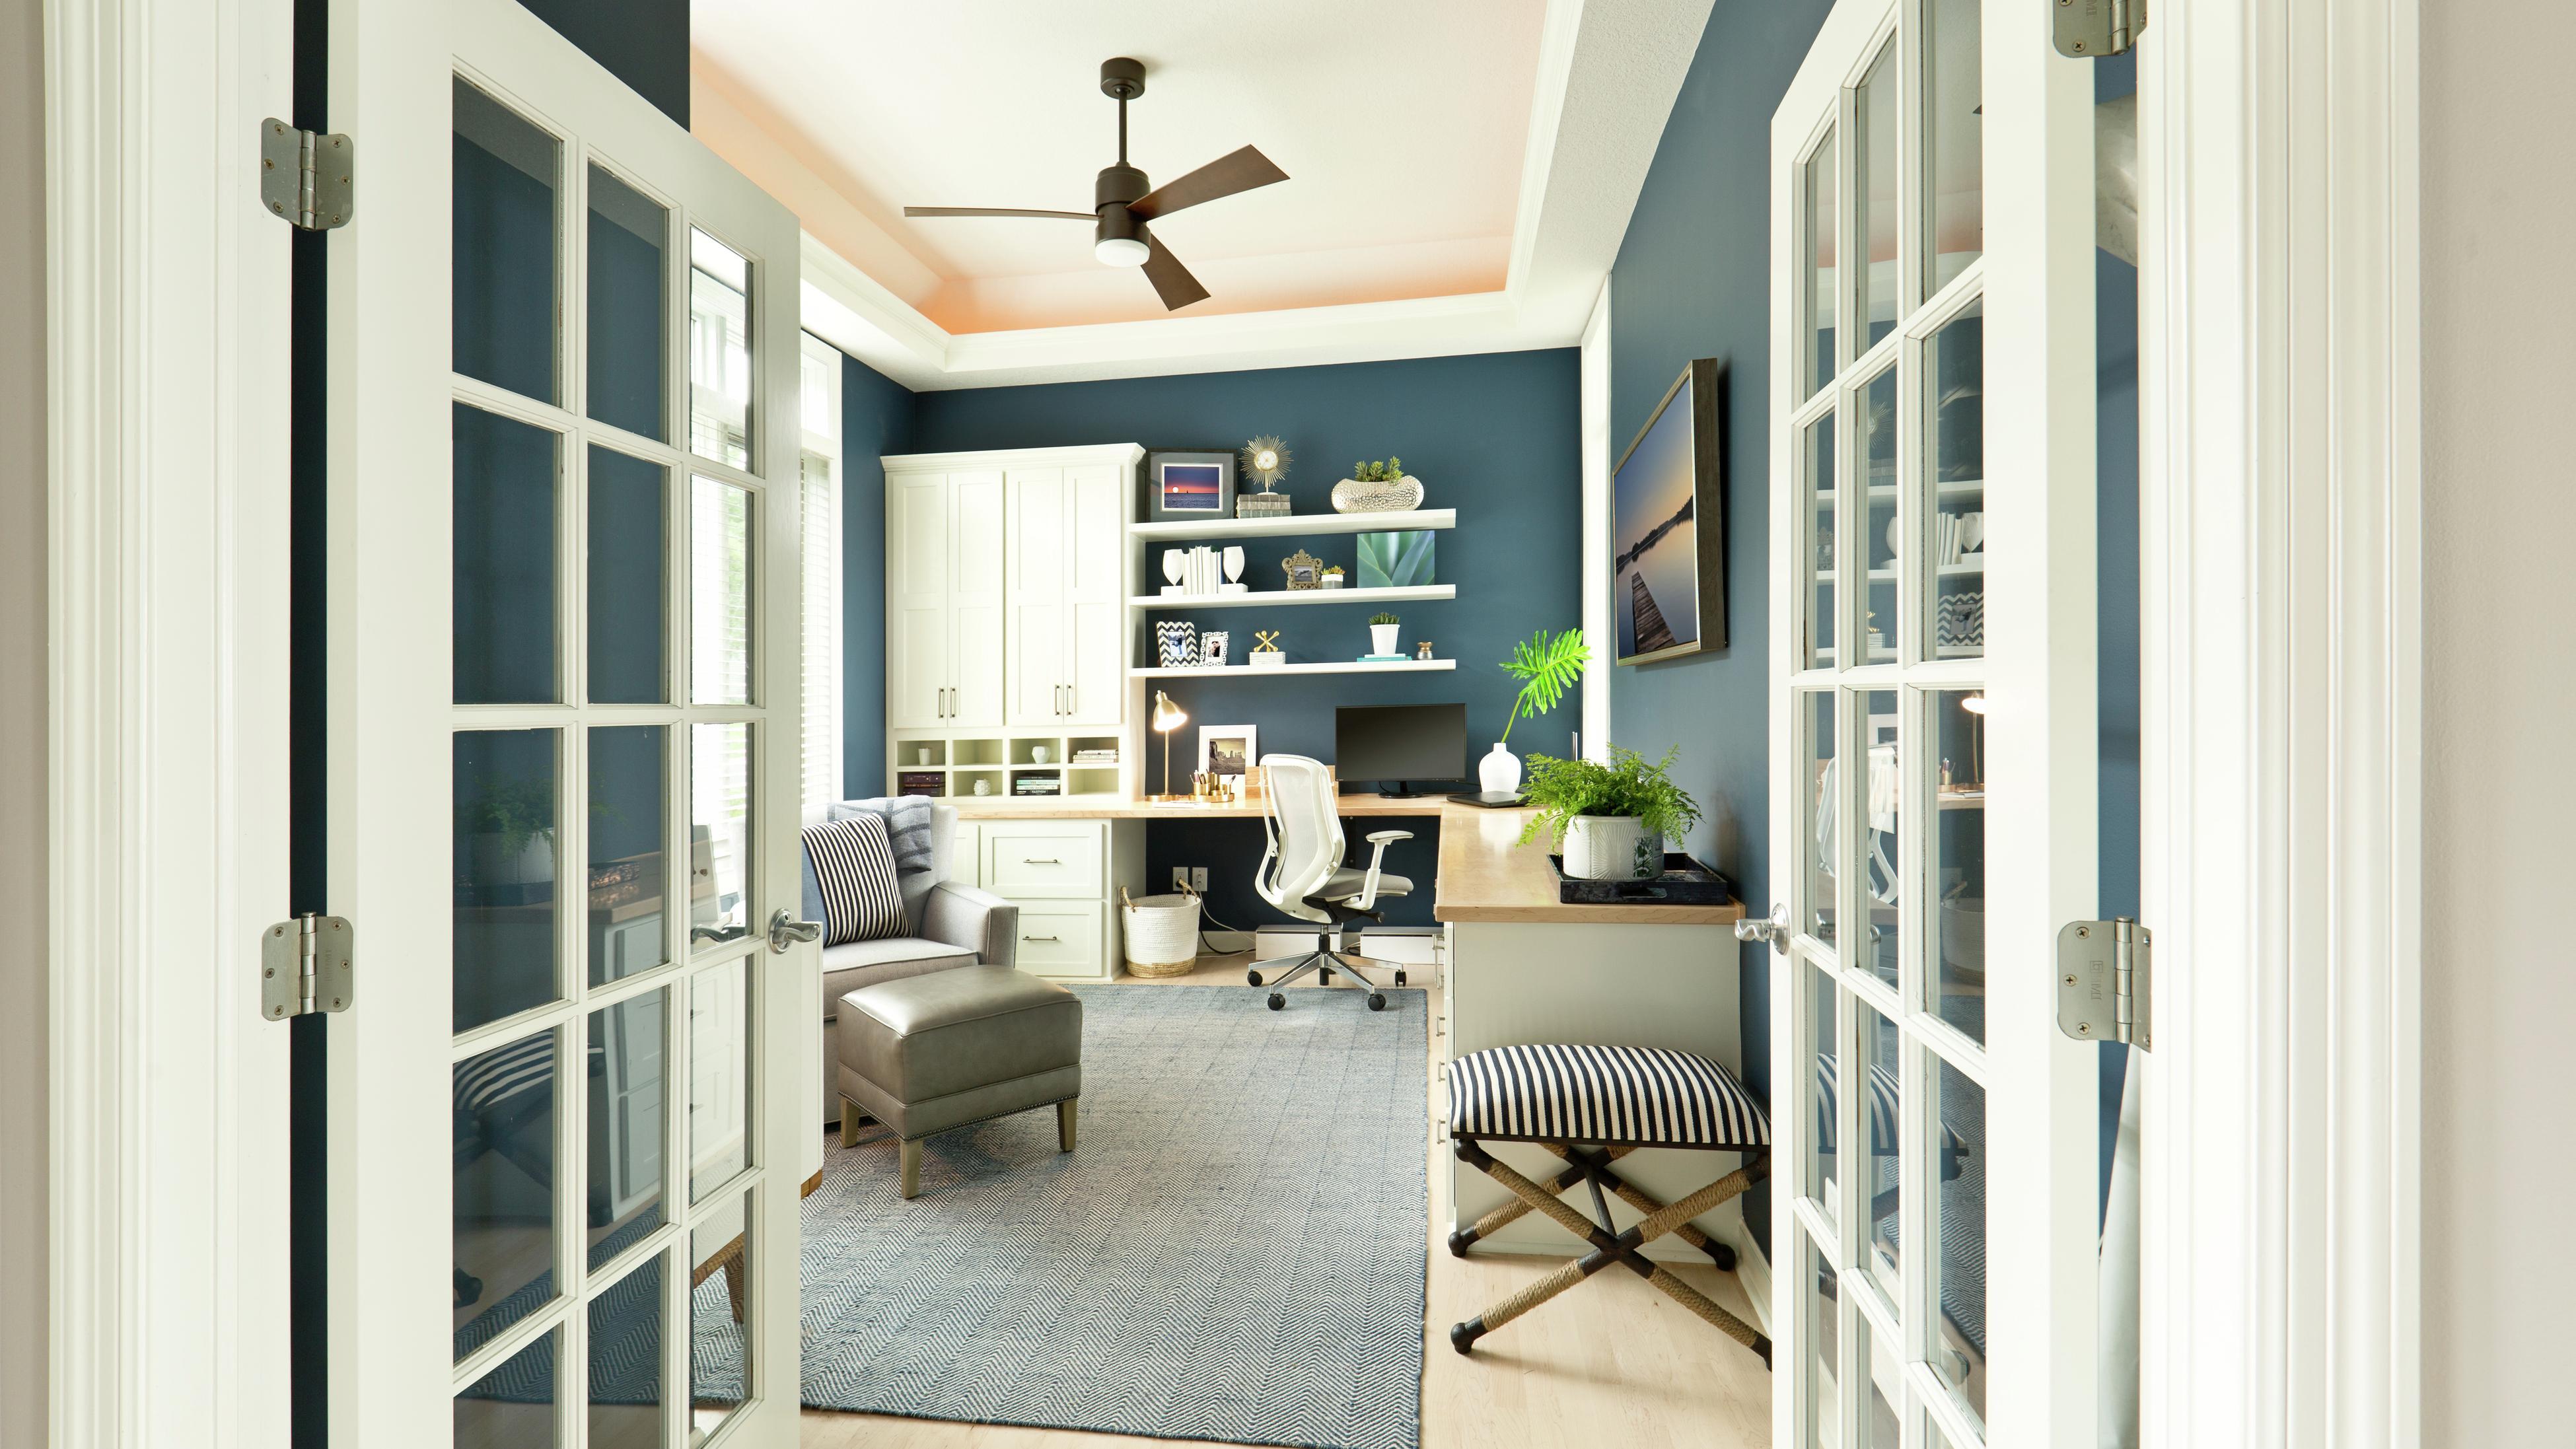 Contemporary study/office space featuring blue walls, timber built-in desk and a black ceiling fan